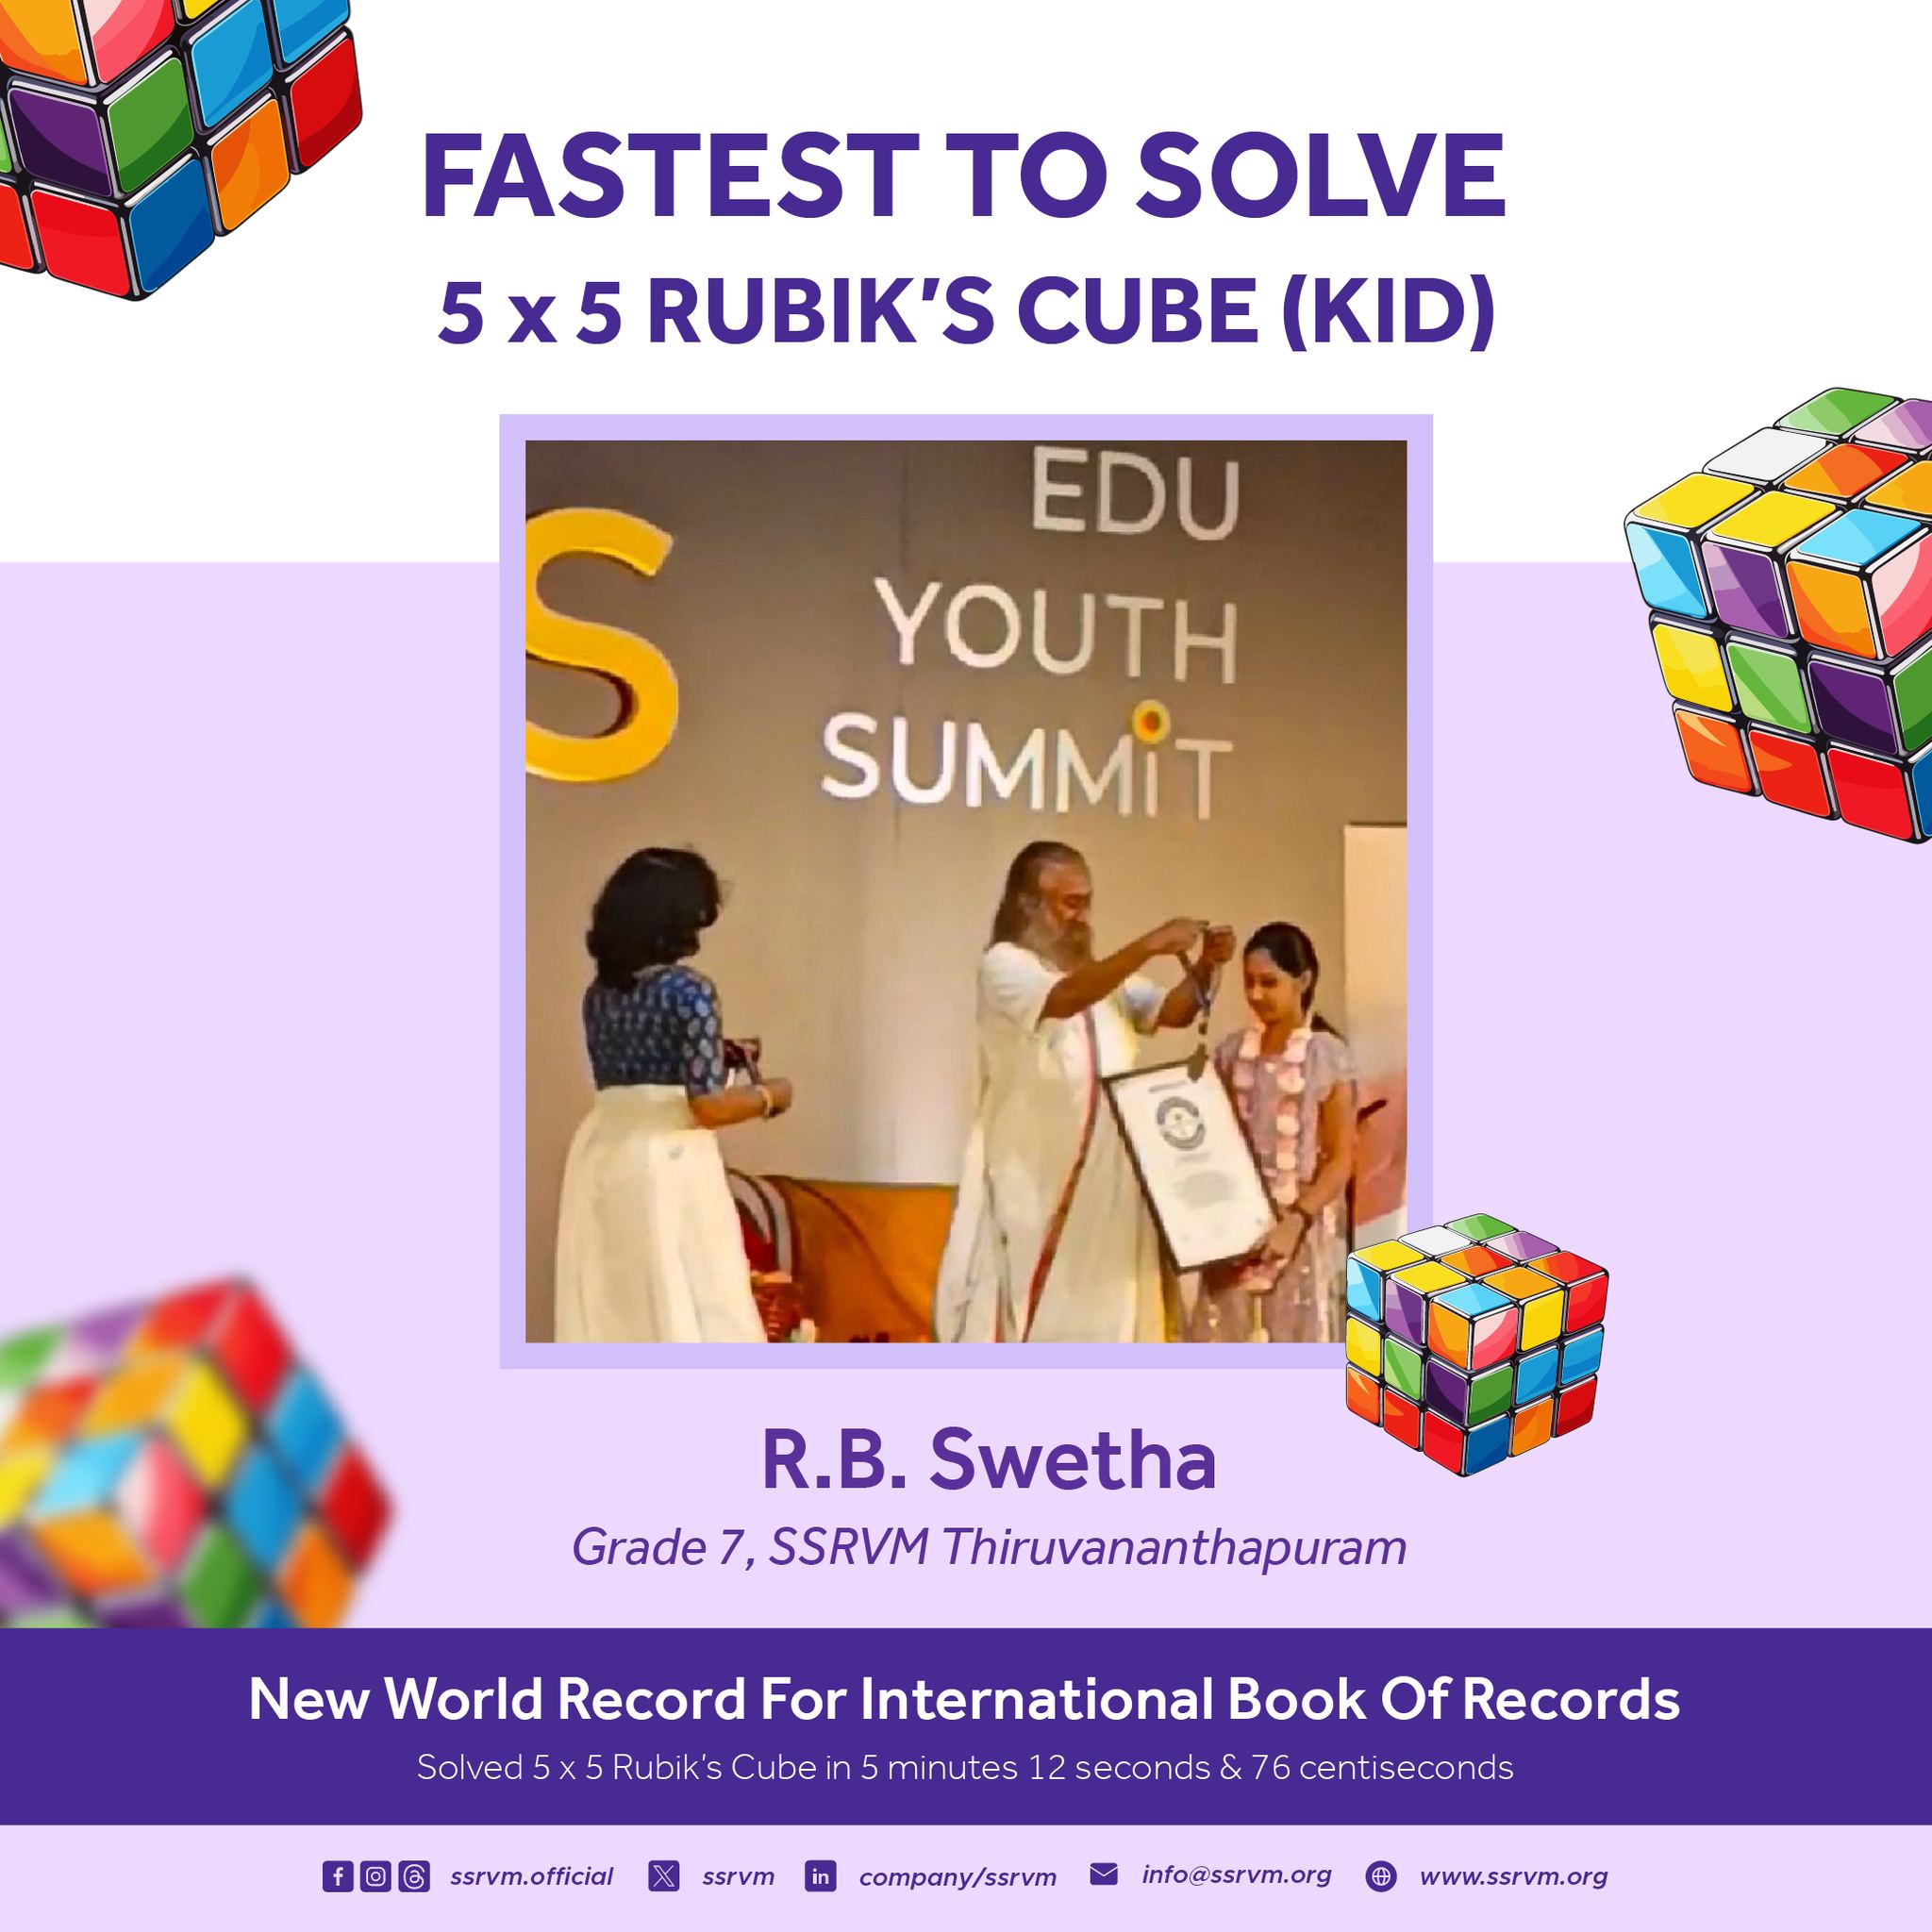 International Book of Records for solving Rubik's cubes